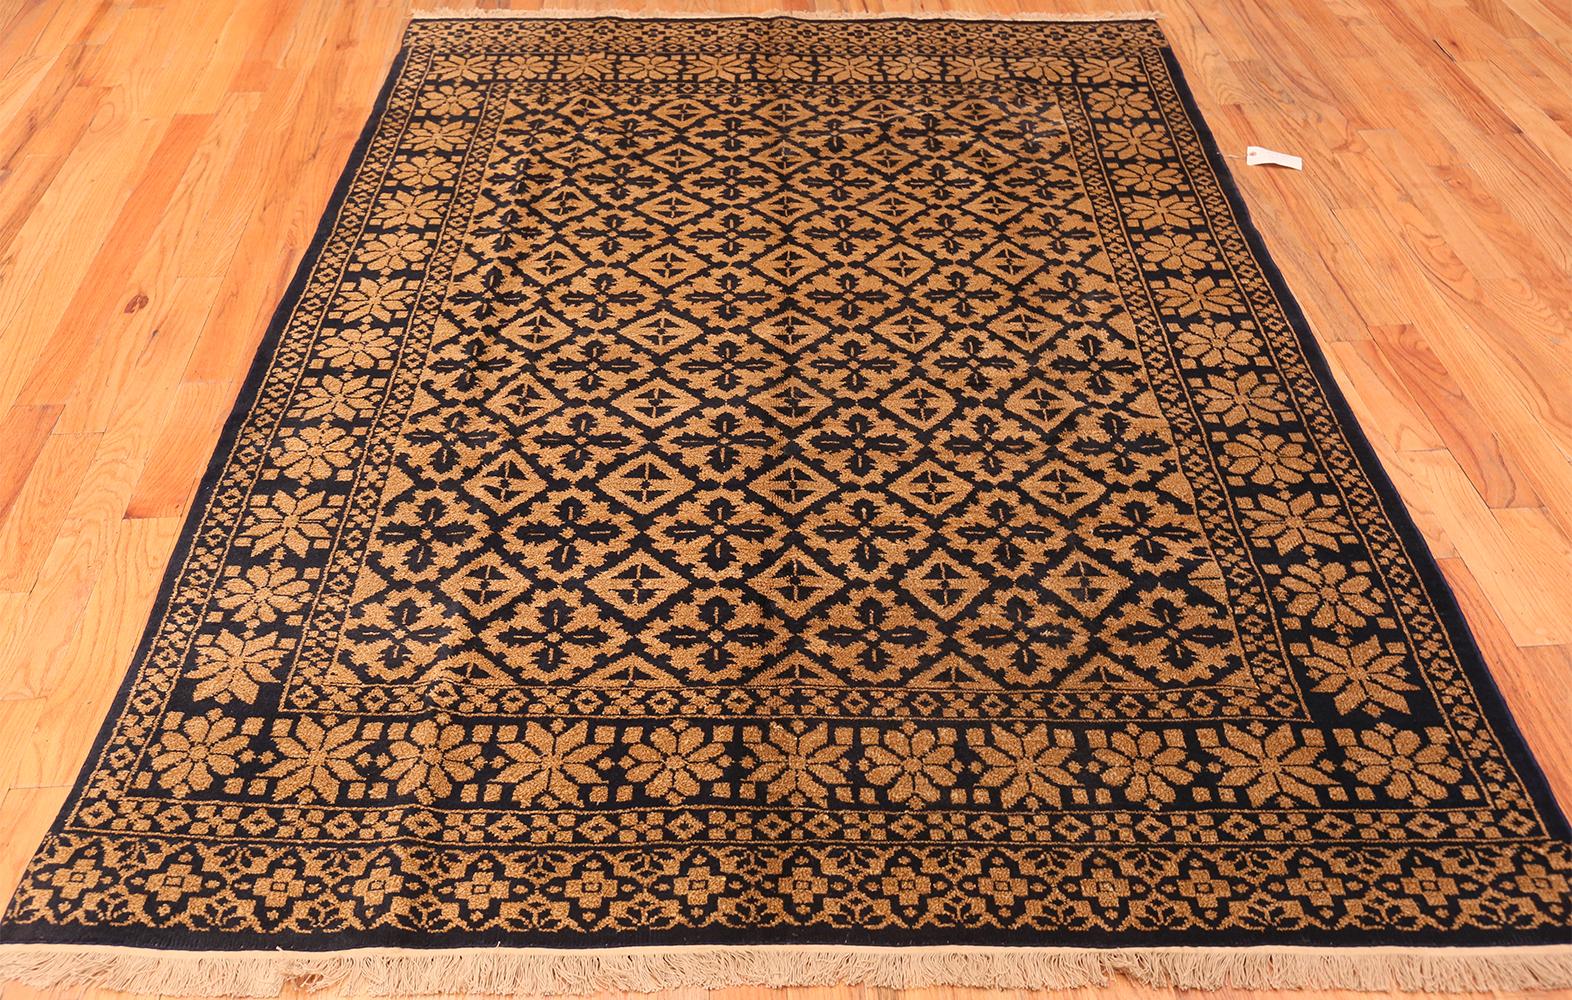 Amazing Geometric Modern Indian Rug. 6 ft x 9 ft In Excellent Condition For Sale In New York, NY